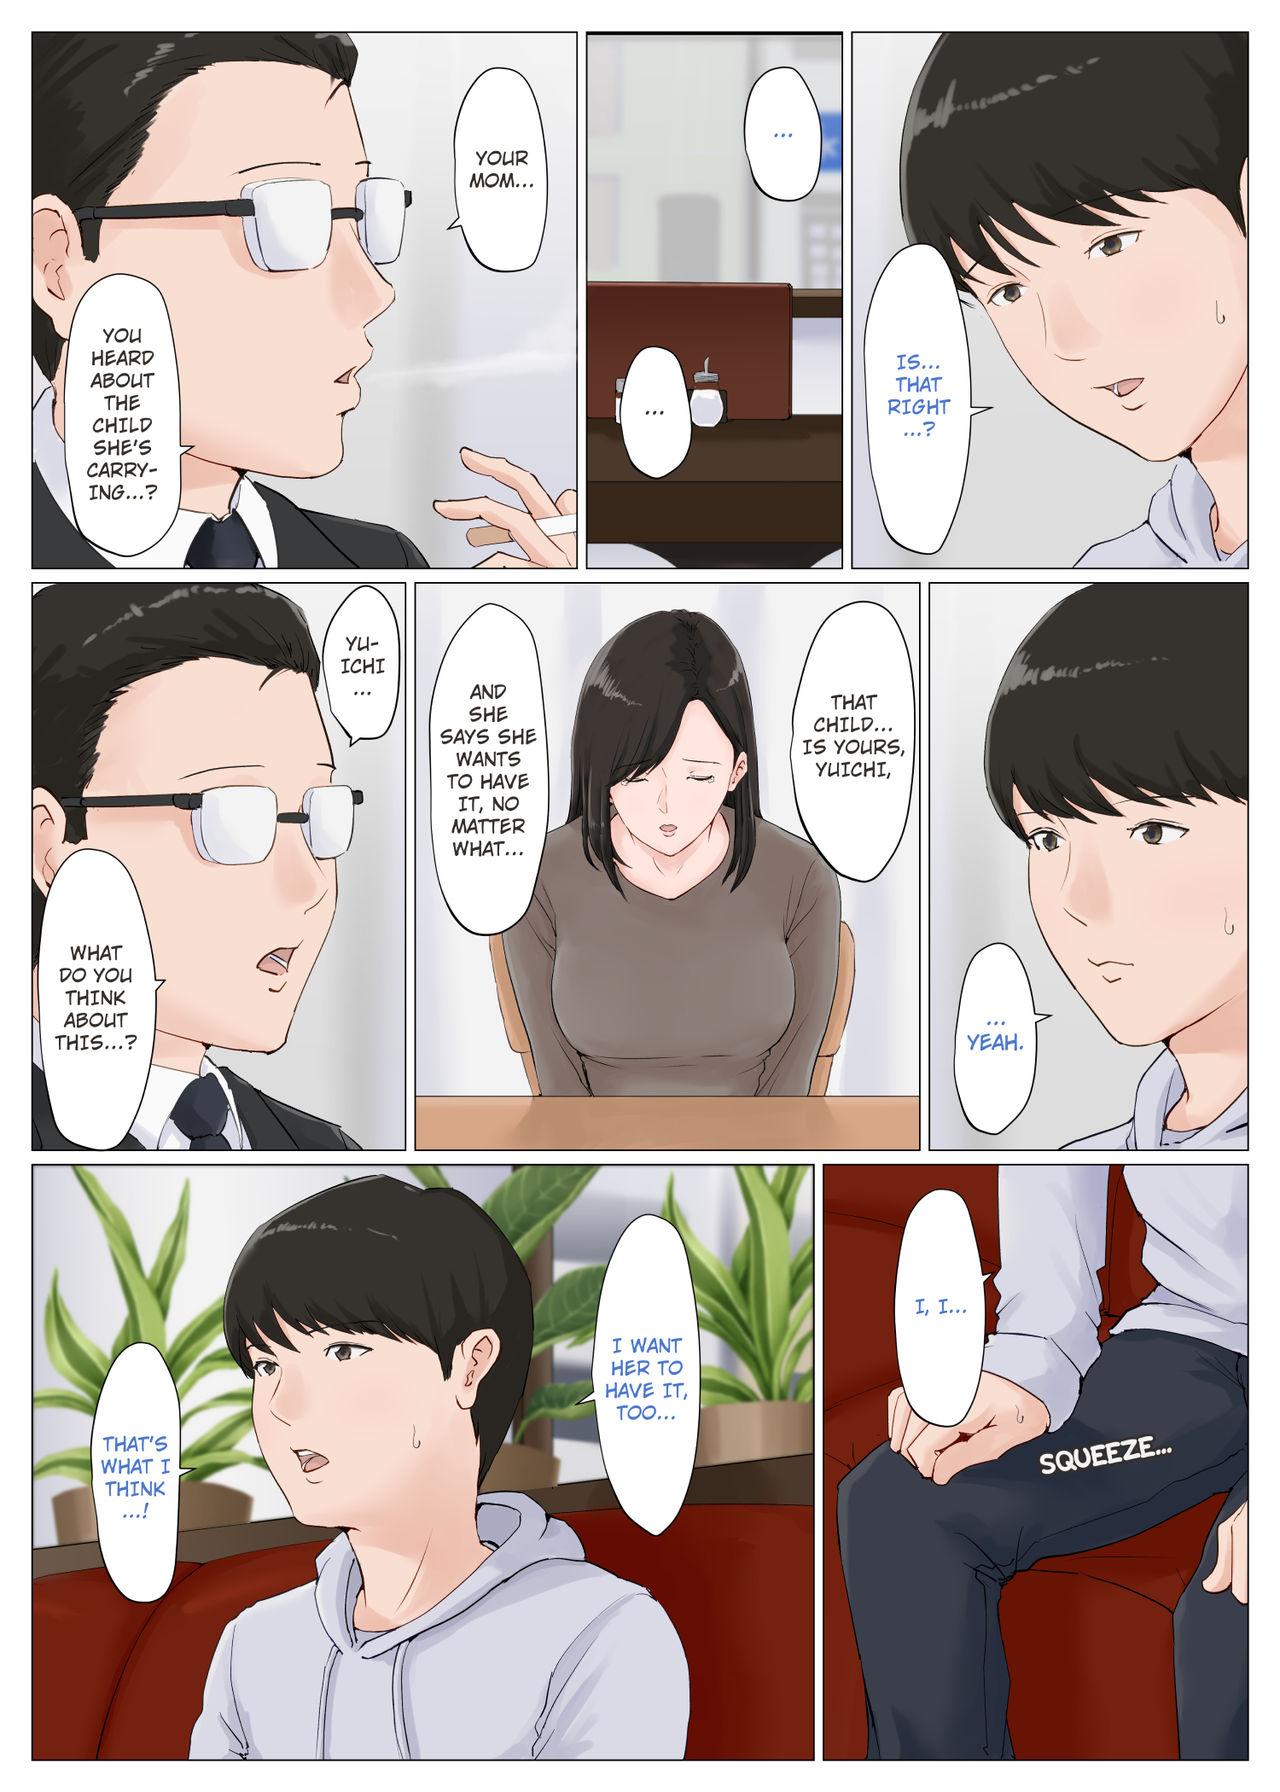 Jerking Kaa-san Janakya Dame Nanda!! 6 Conclusion | Mother and No Other!! 6 Conclusion Pt 2 - Original Gonzo - Page 8